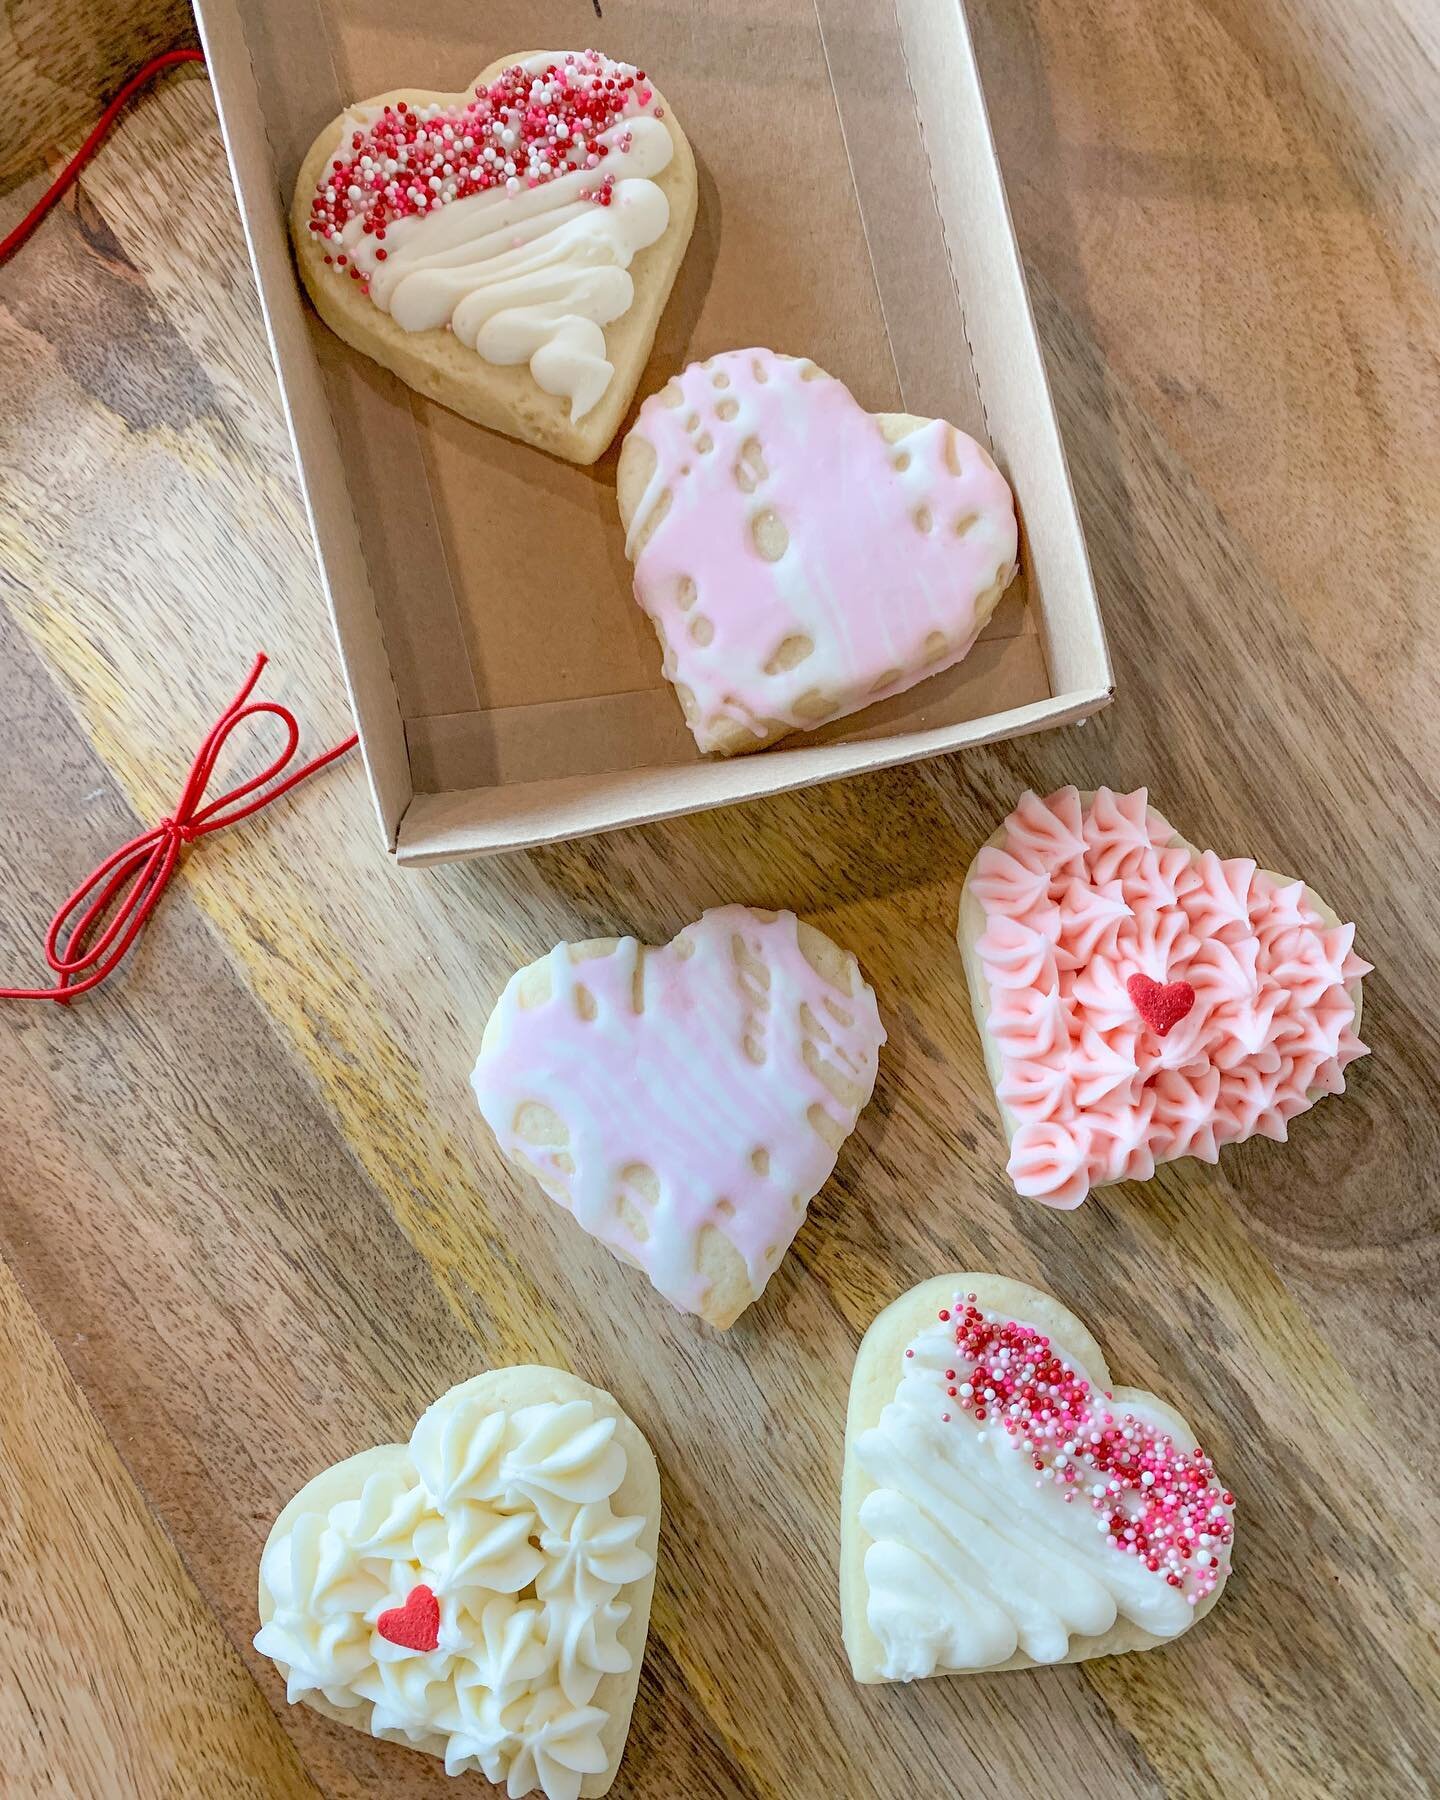 All you need is love. And cookies.

All ready to go in a giftable kraft box, these scratch-made heart-shaped sugar cookies are the perfect gift for your Valentine, Galentine, and everything in between. 
And can we just say there&rsquo;s no shame in g